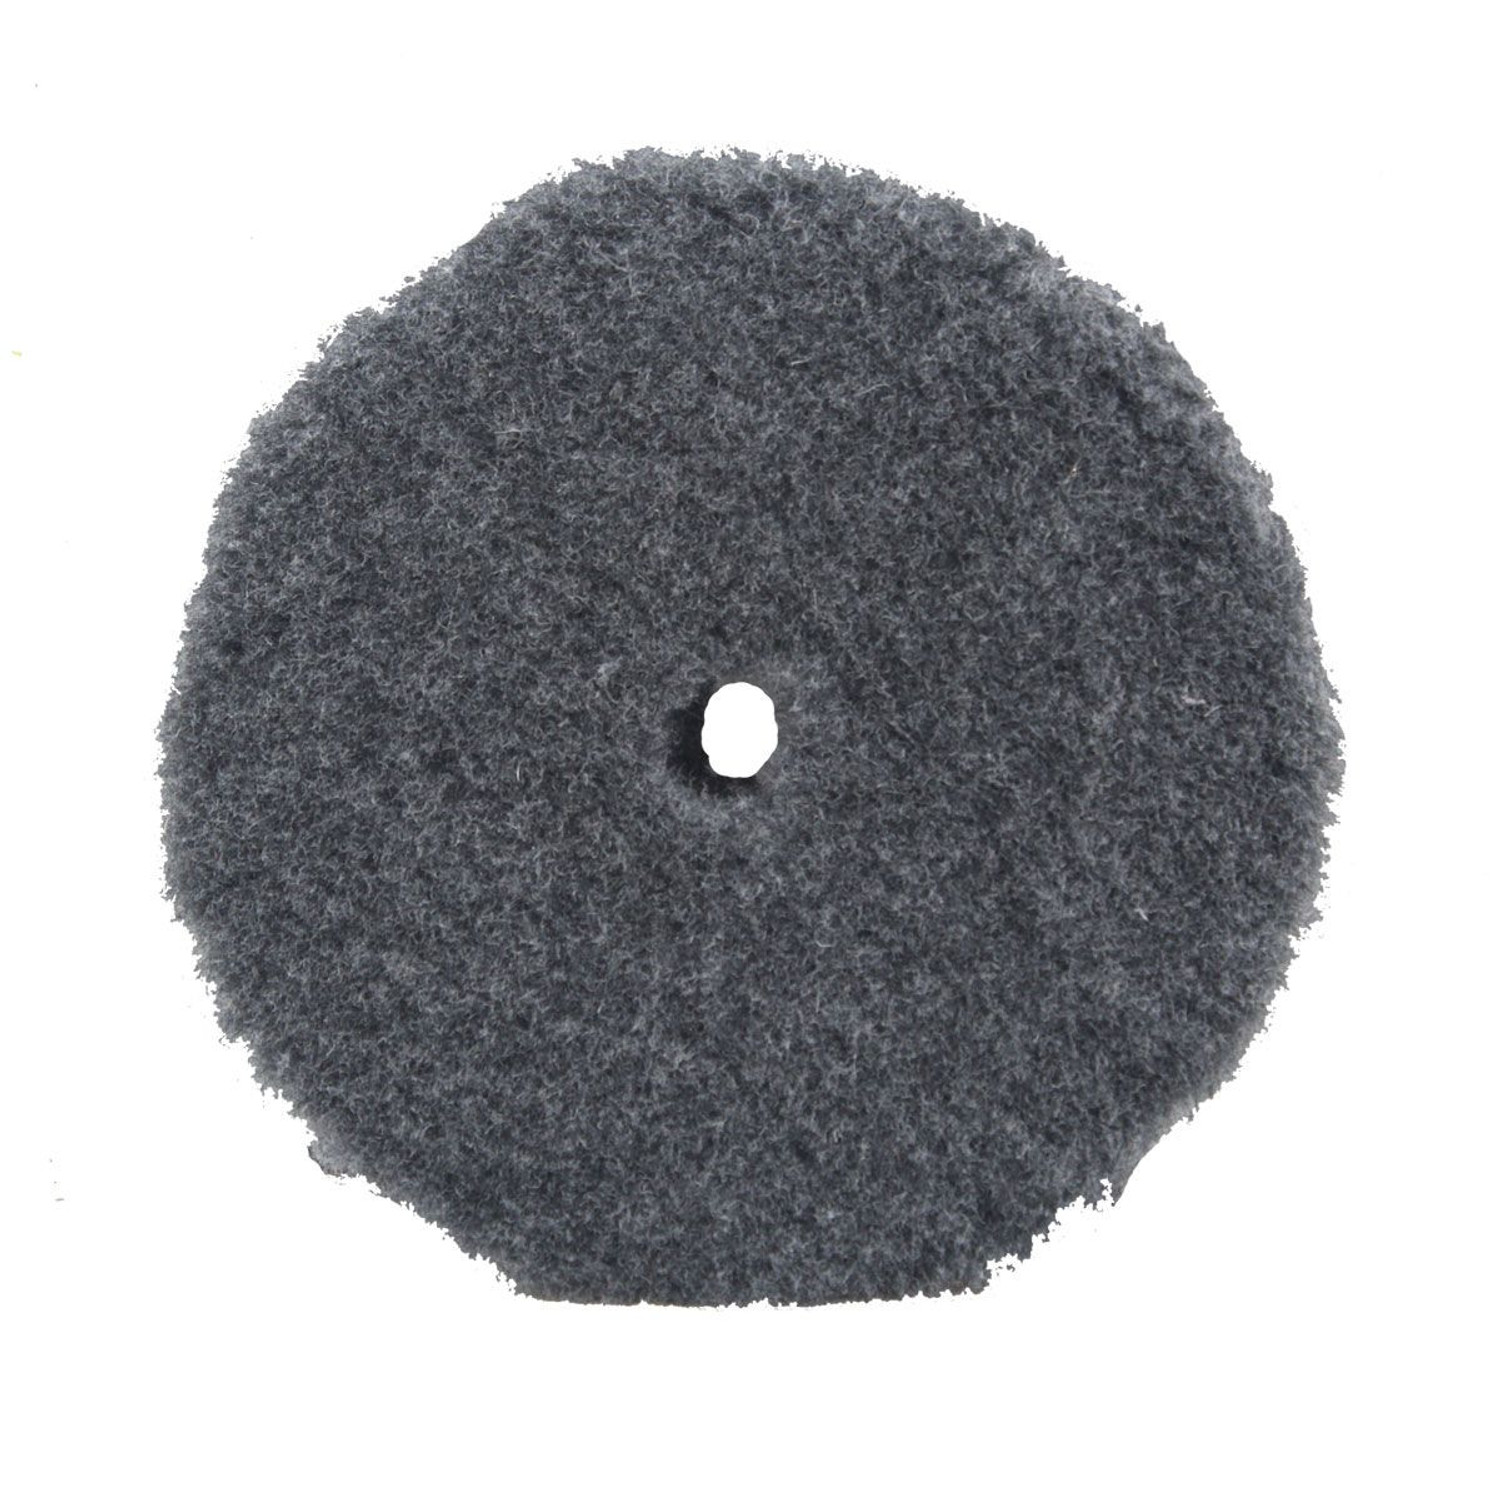 Wool Pads  Synthetic Wool Cutting Pad 3,5,6 Cutting Pads